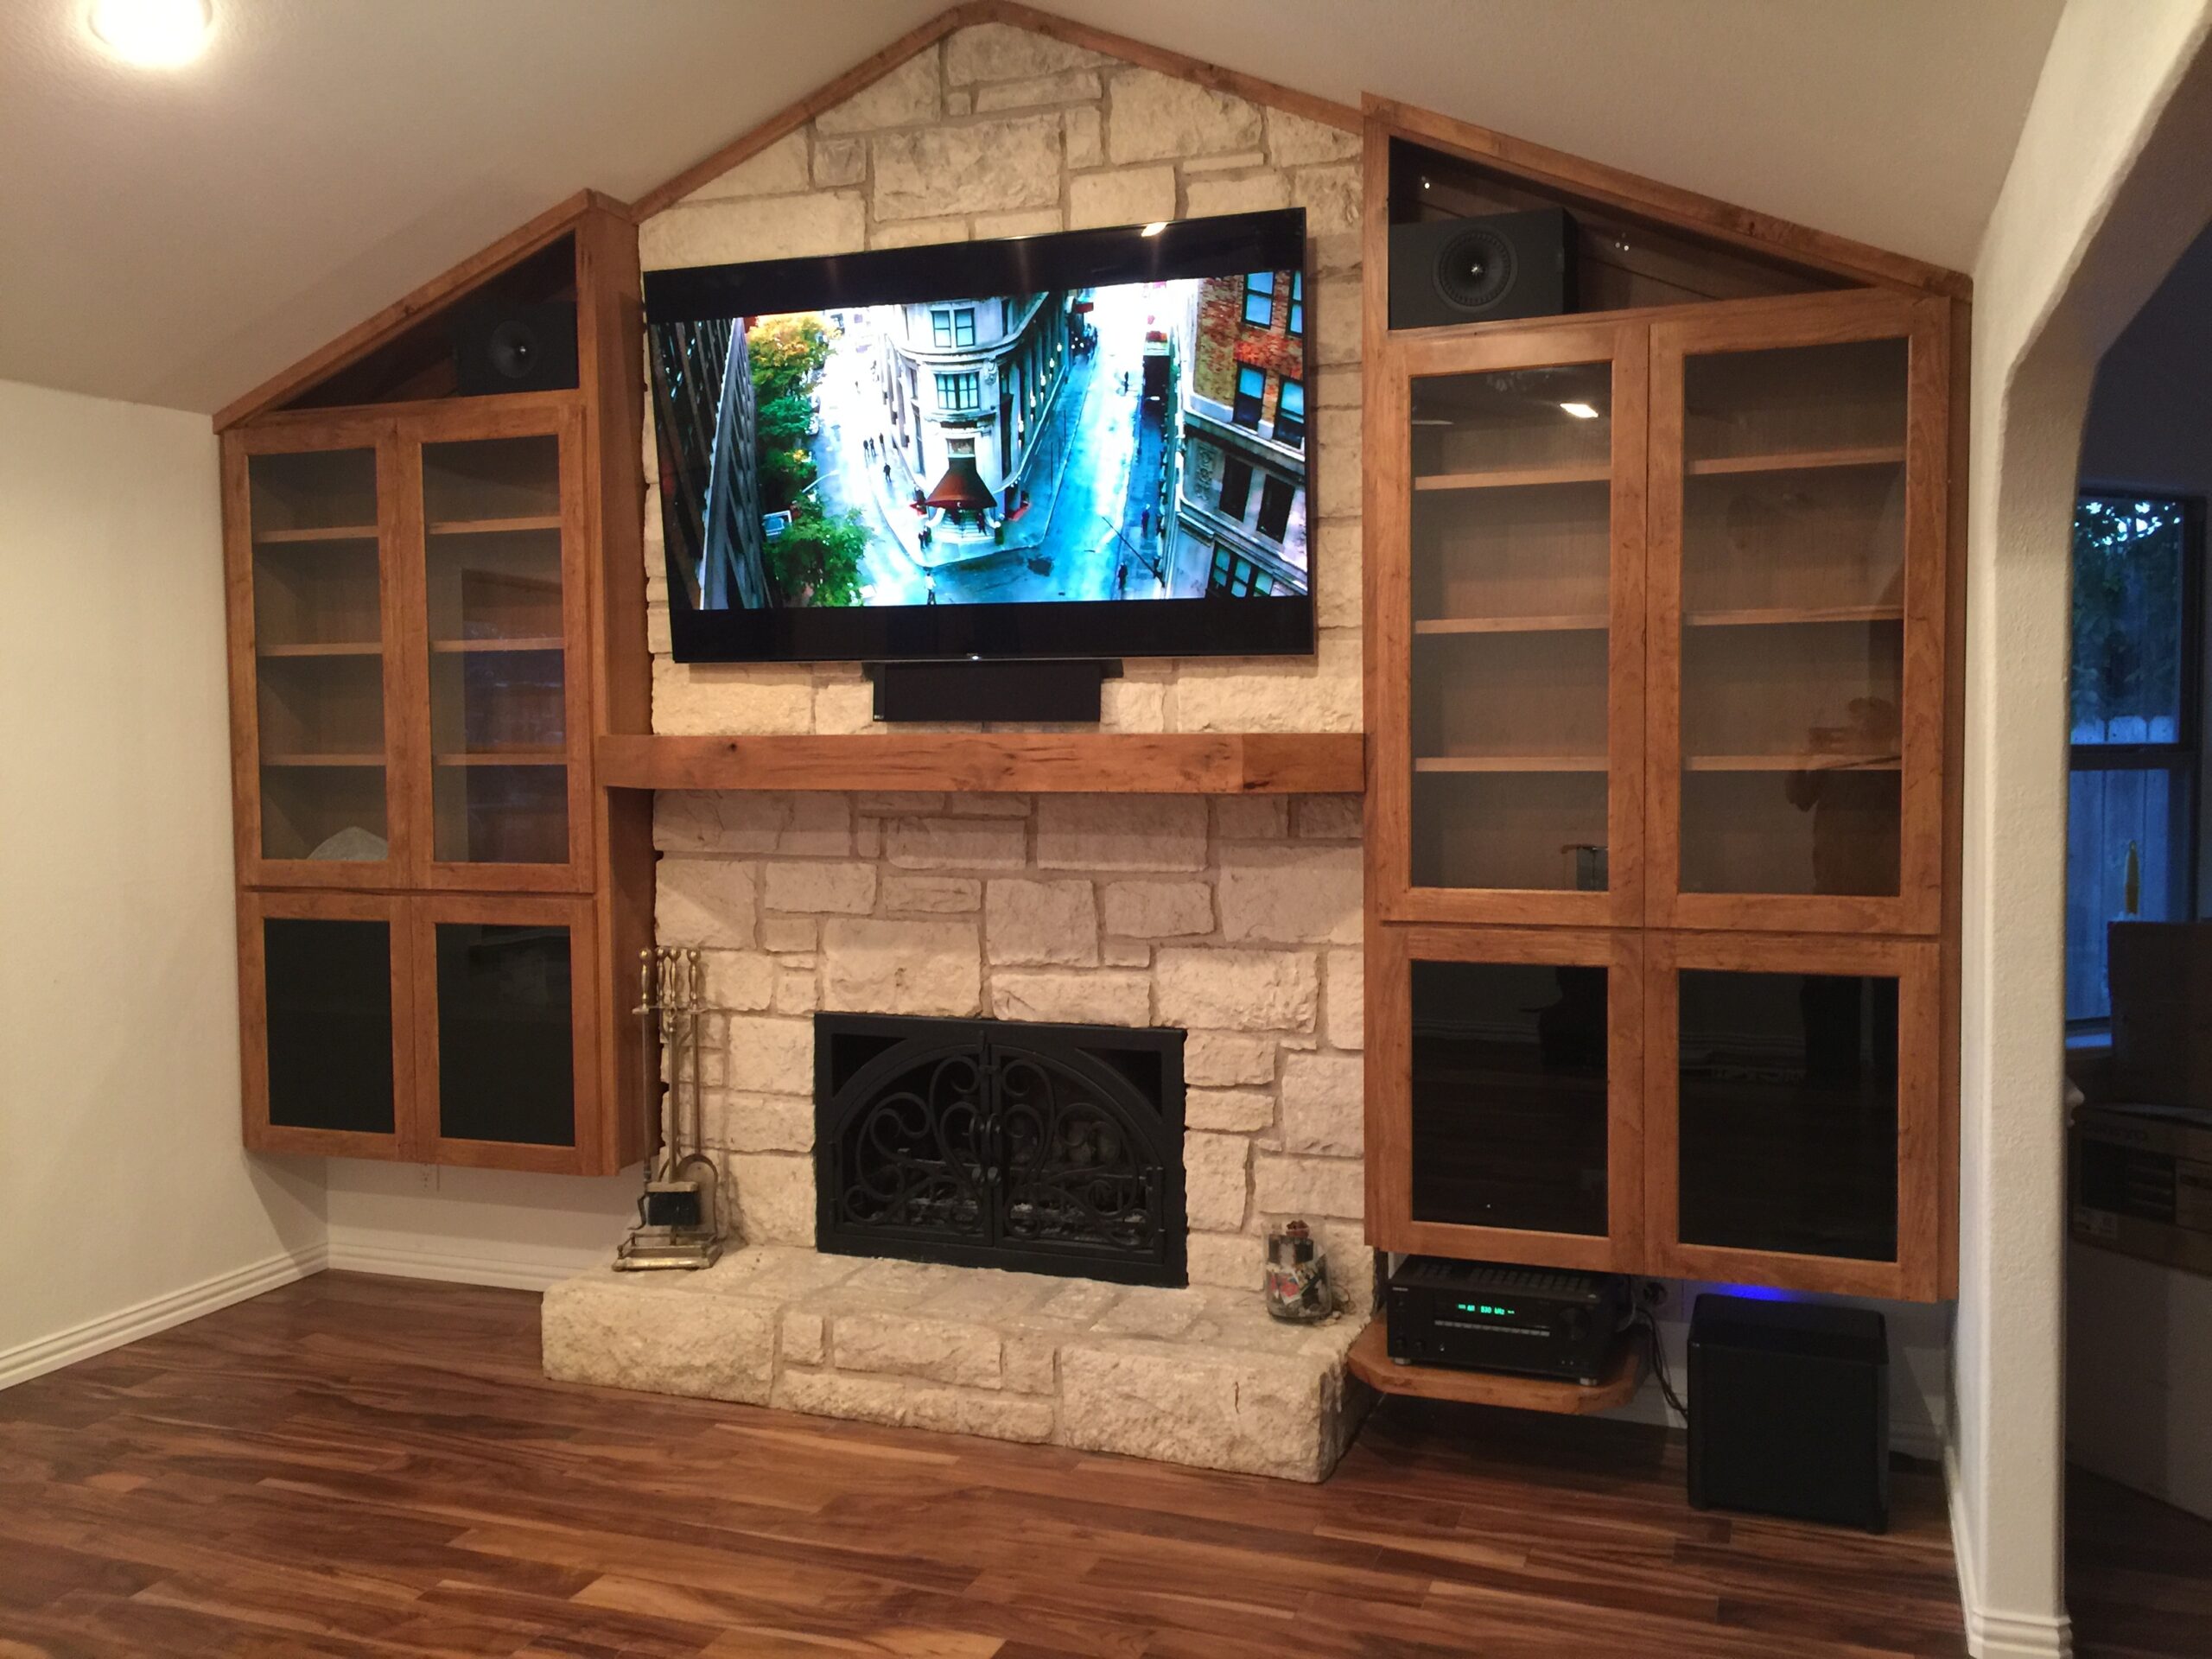 TV mounted above fireplace